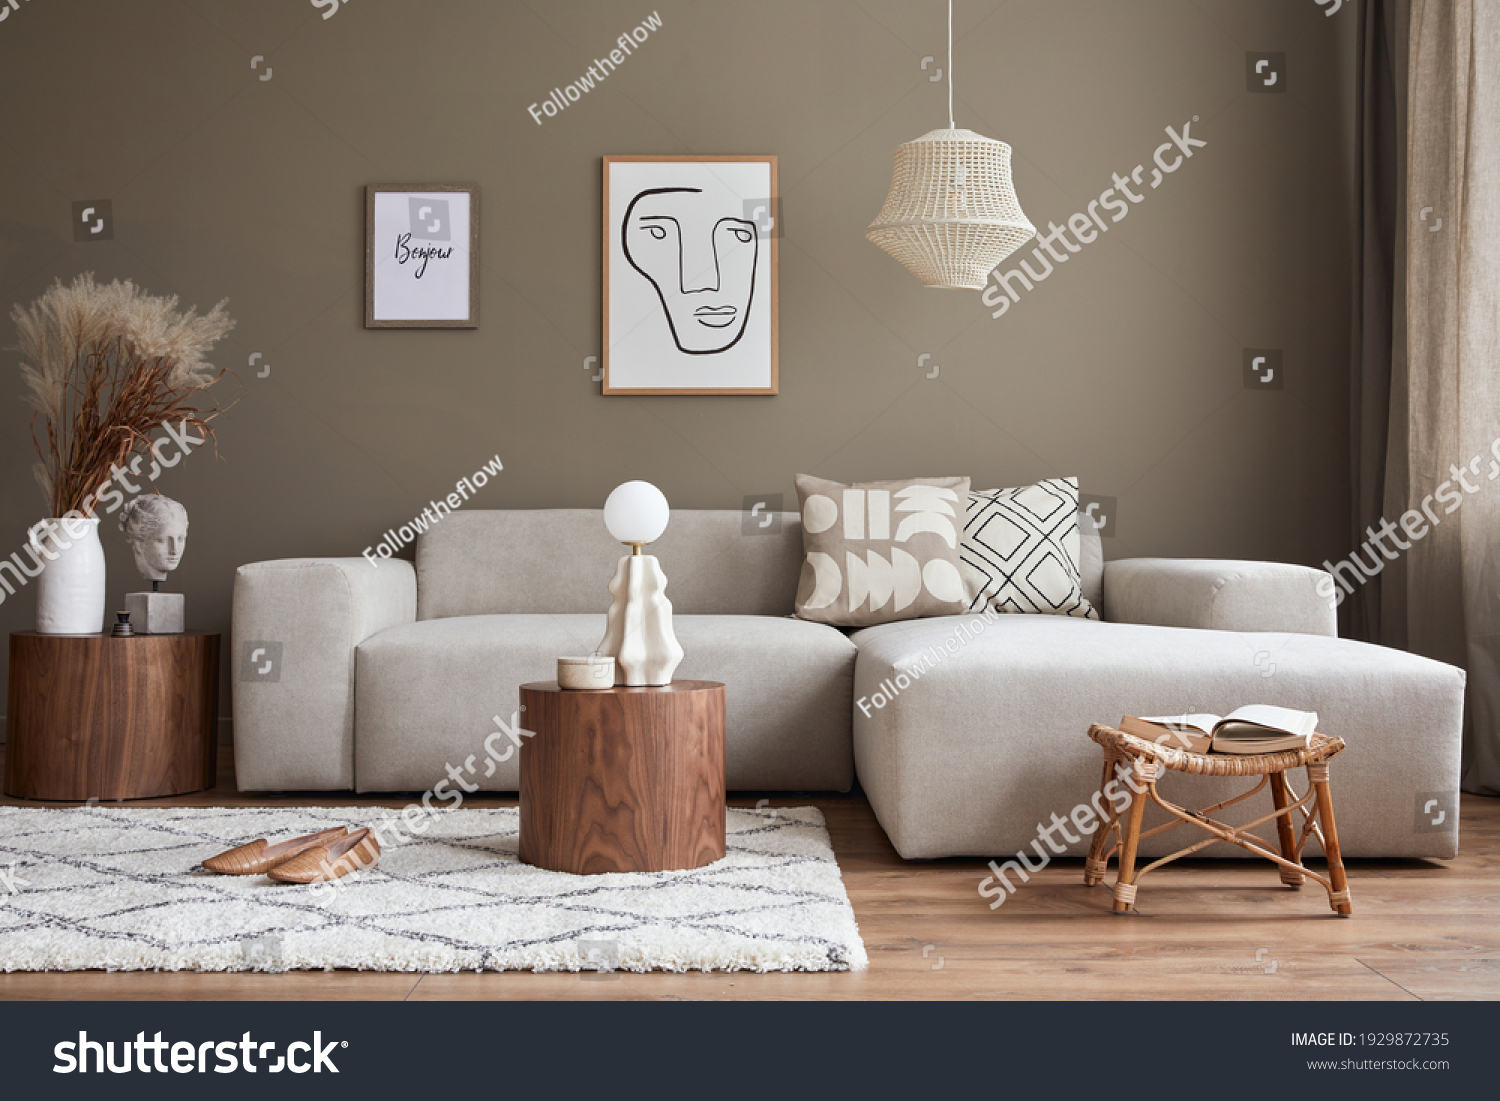 Interior design of cozy living room with stylish sofa, coffee table, dired flowers in vase, mock up poster, carpet, decoration, pillows, plaid and personal accessories in modern home decor. Template. #1929872735